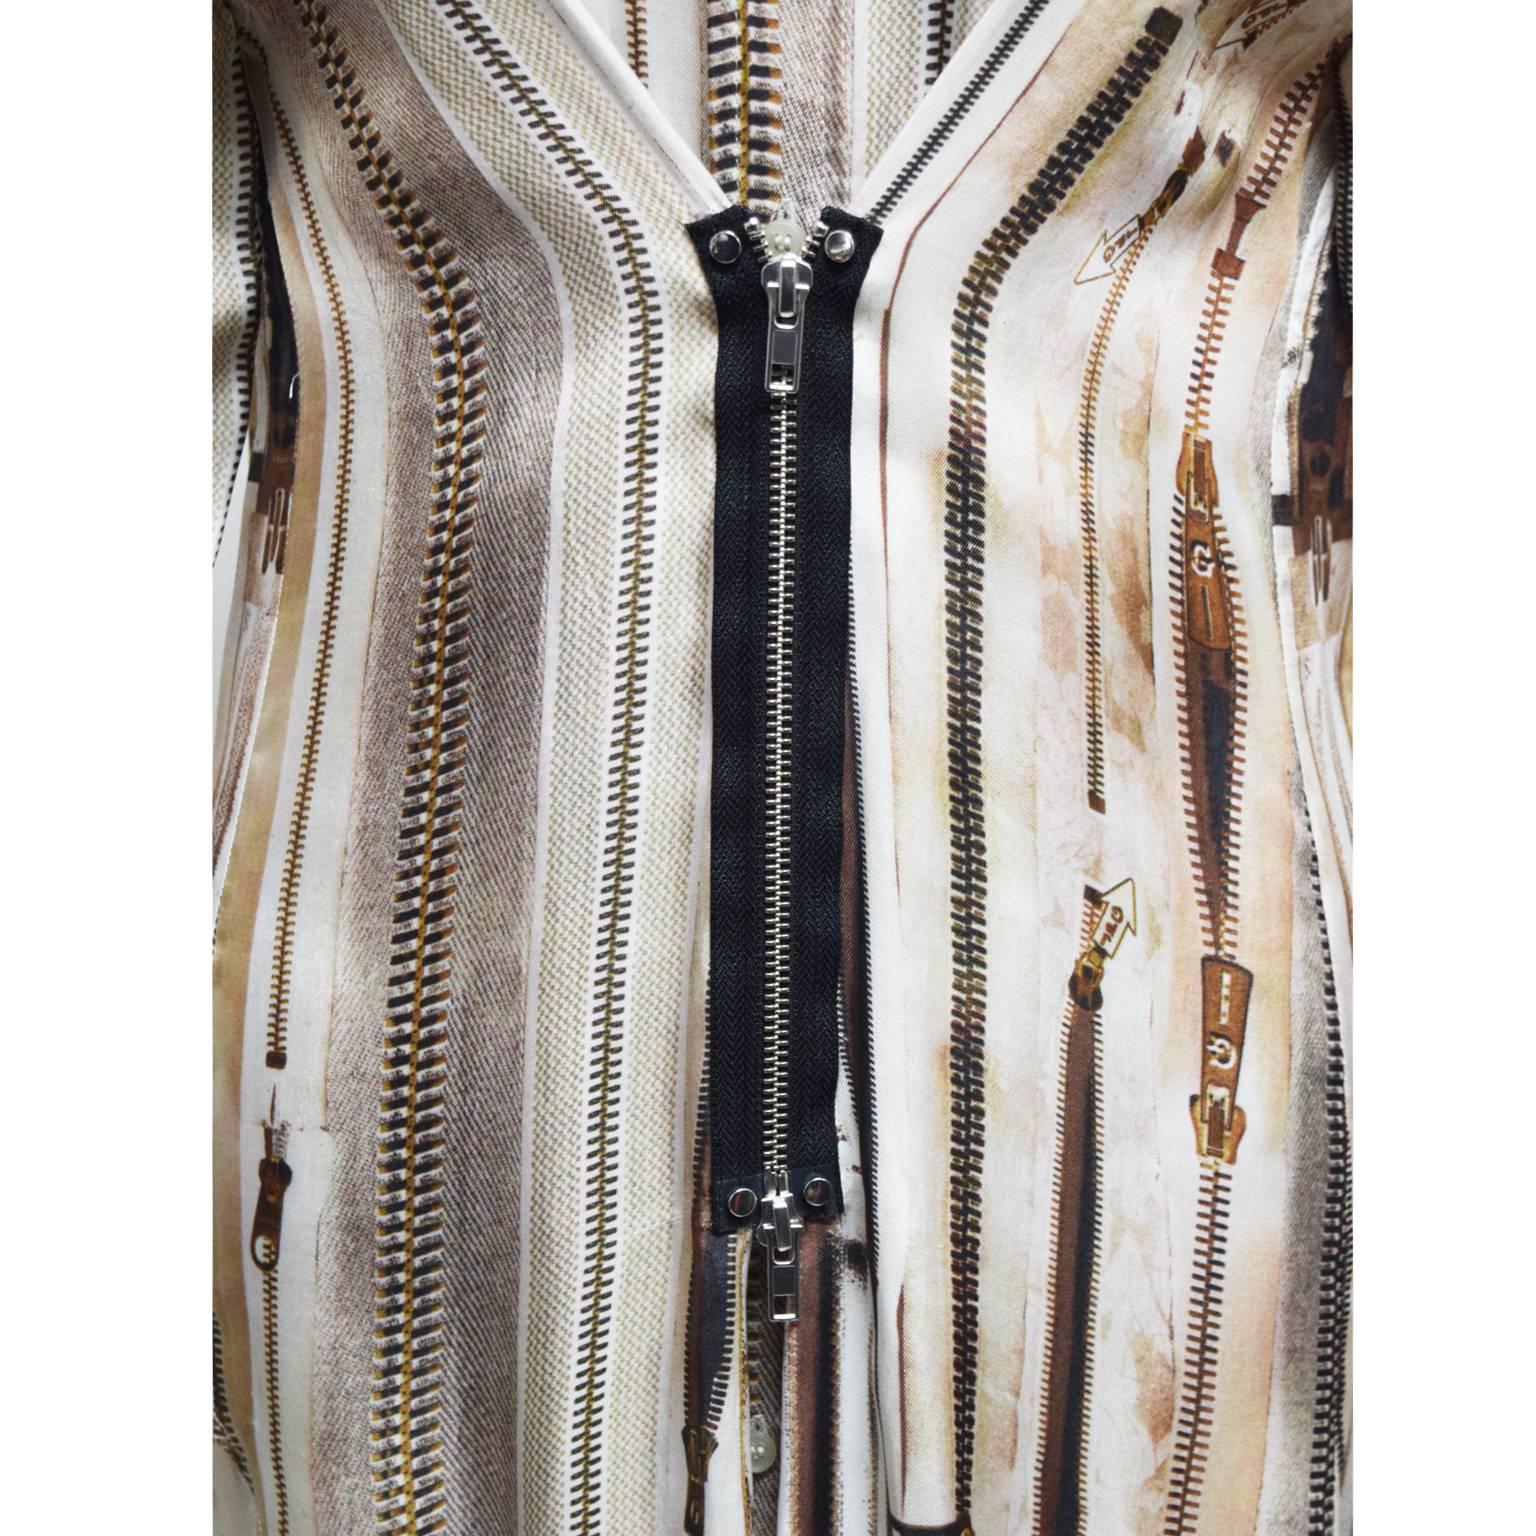 Jean Paul Gaultier Silk Neutral Zipper Print Blouse with Zipped Front  In Excellent Condition For Sale In Henrico, VA